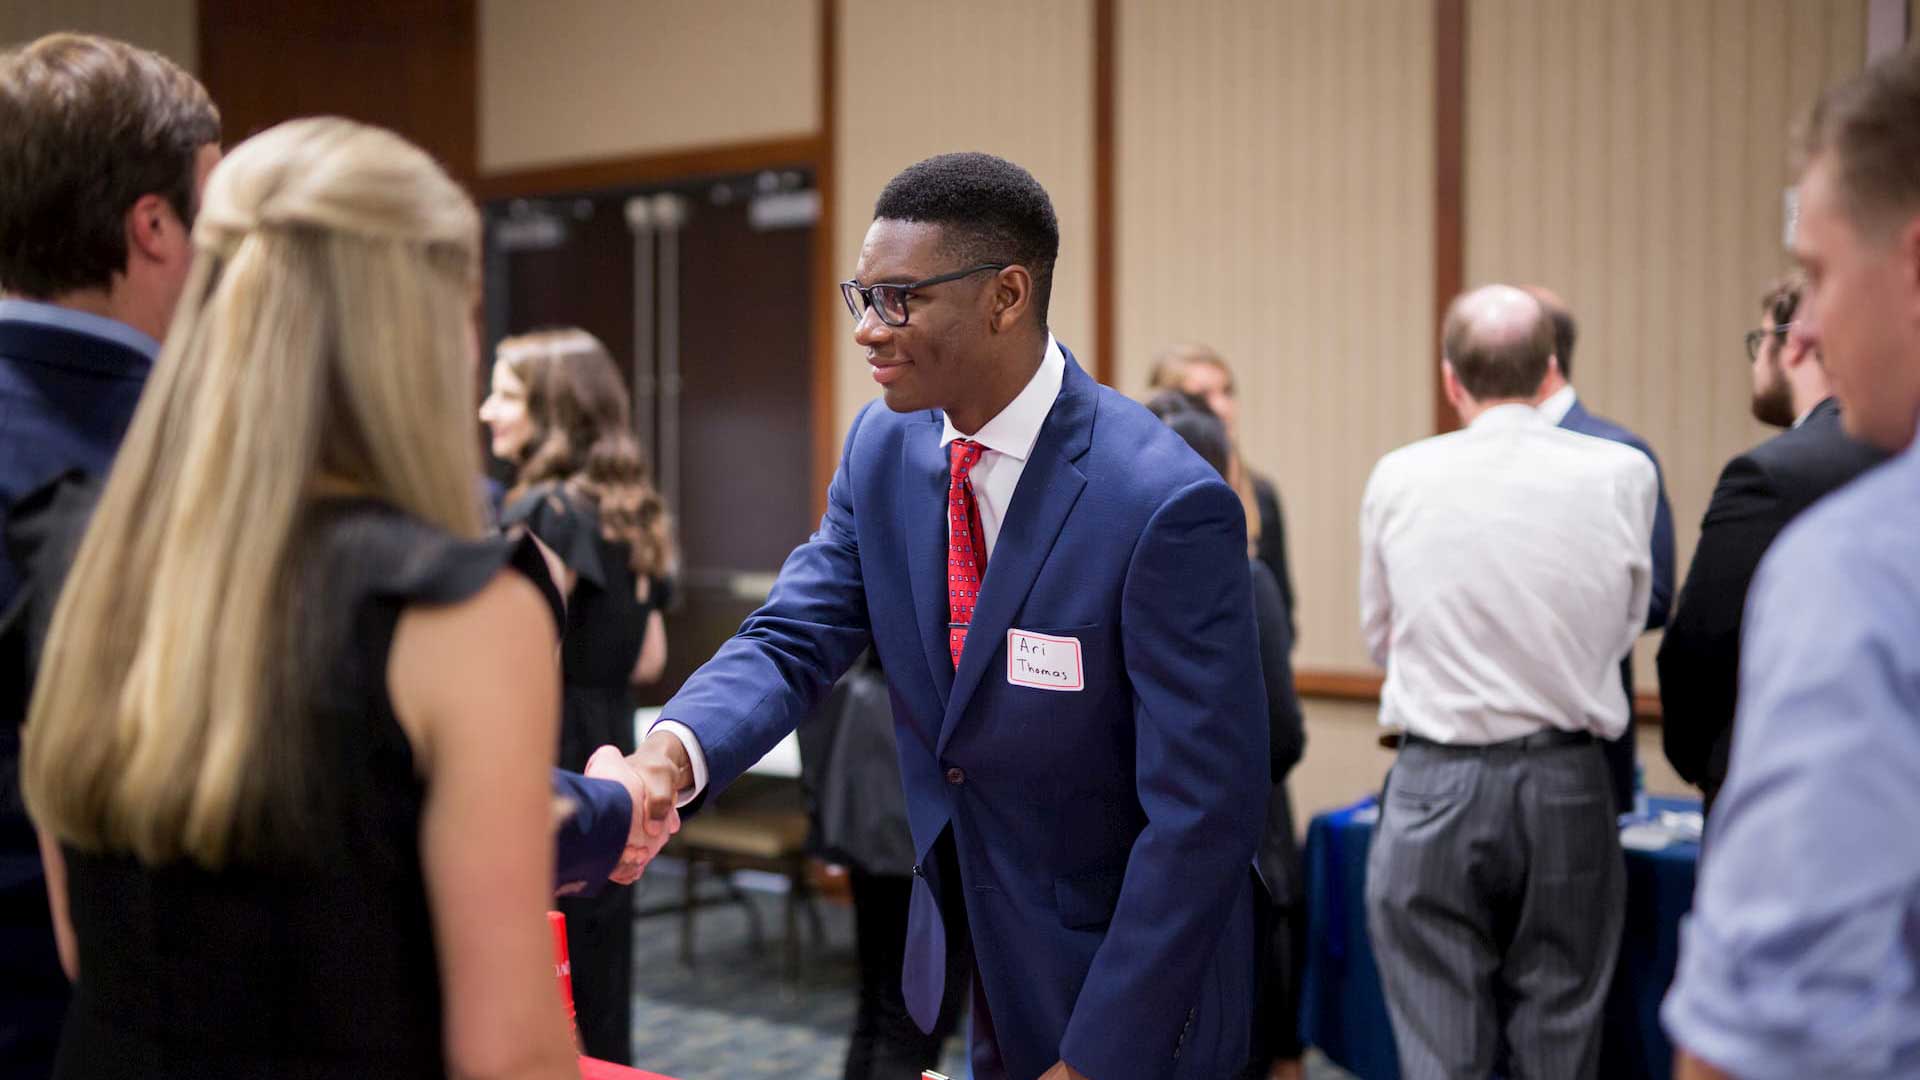 business student shaking hands at event